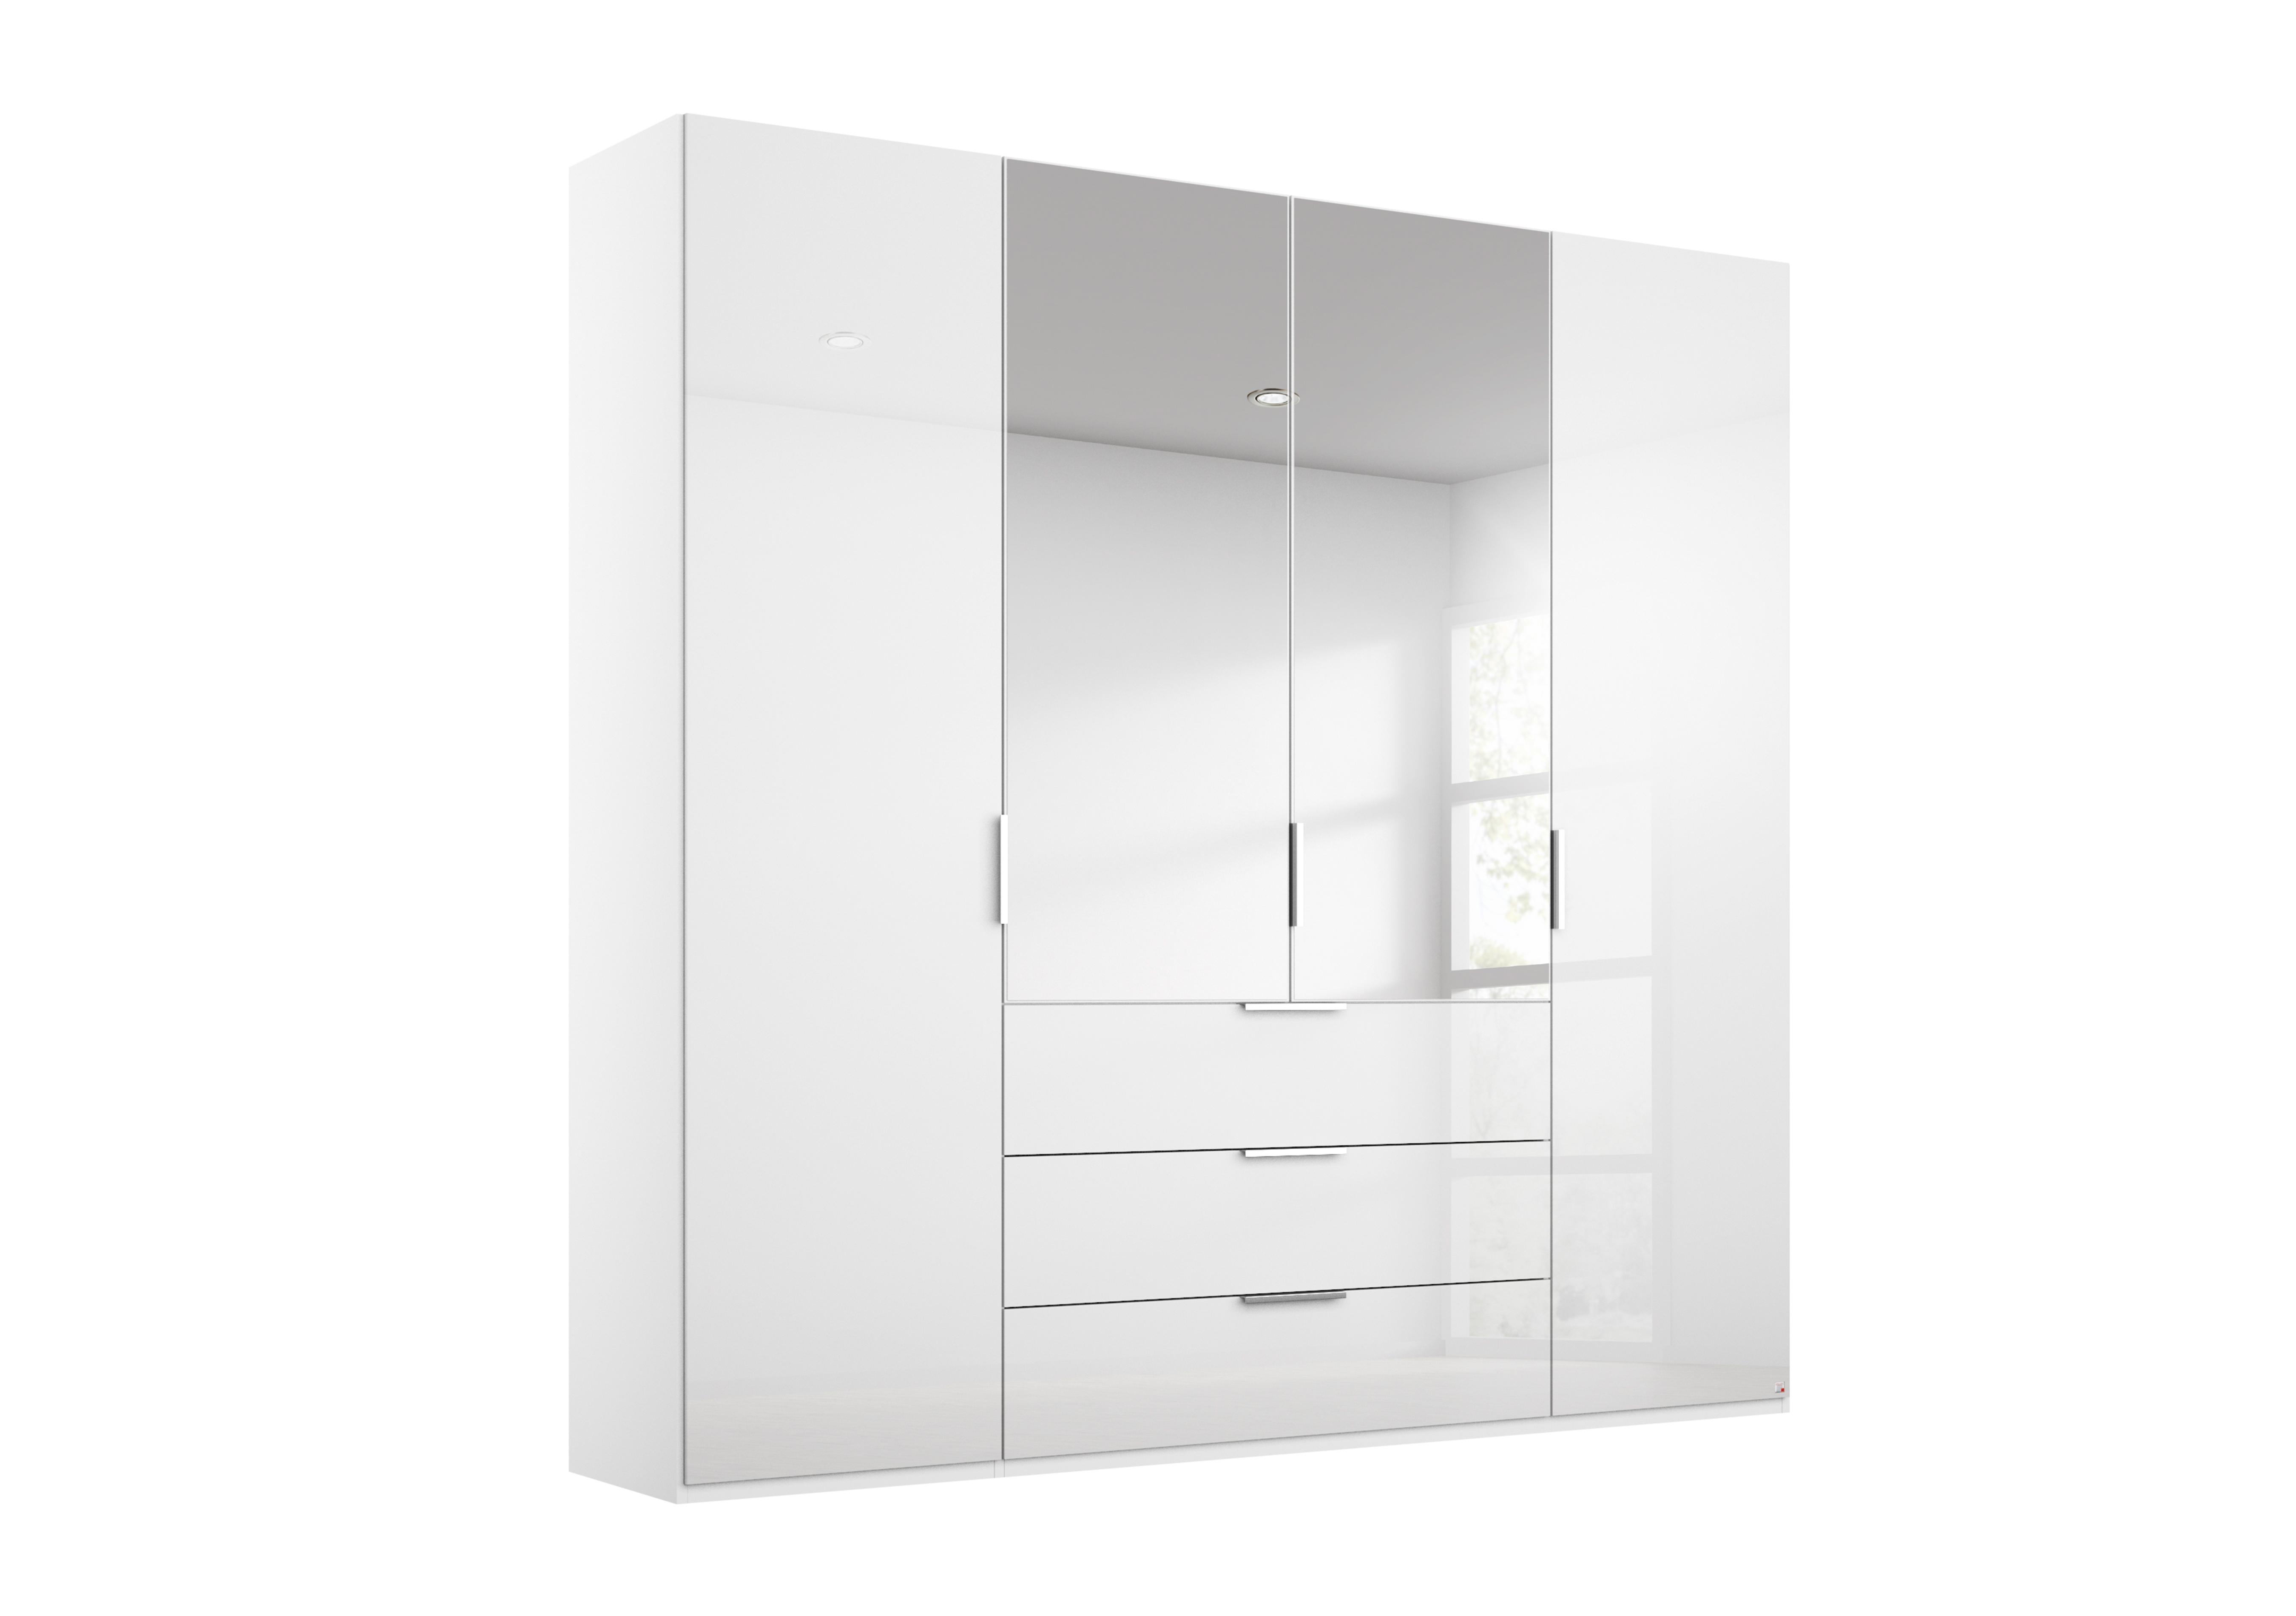 Formes Glass 4 Door Combo Hinged Wardrobe with 2 Mirrors and Drawers in A131b White White Front on Furniture Village